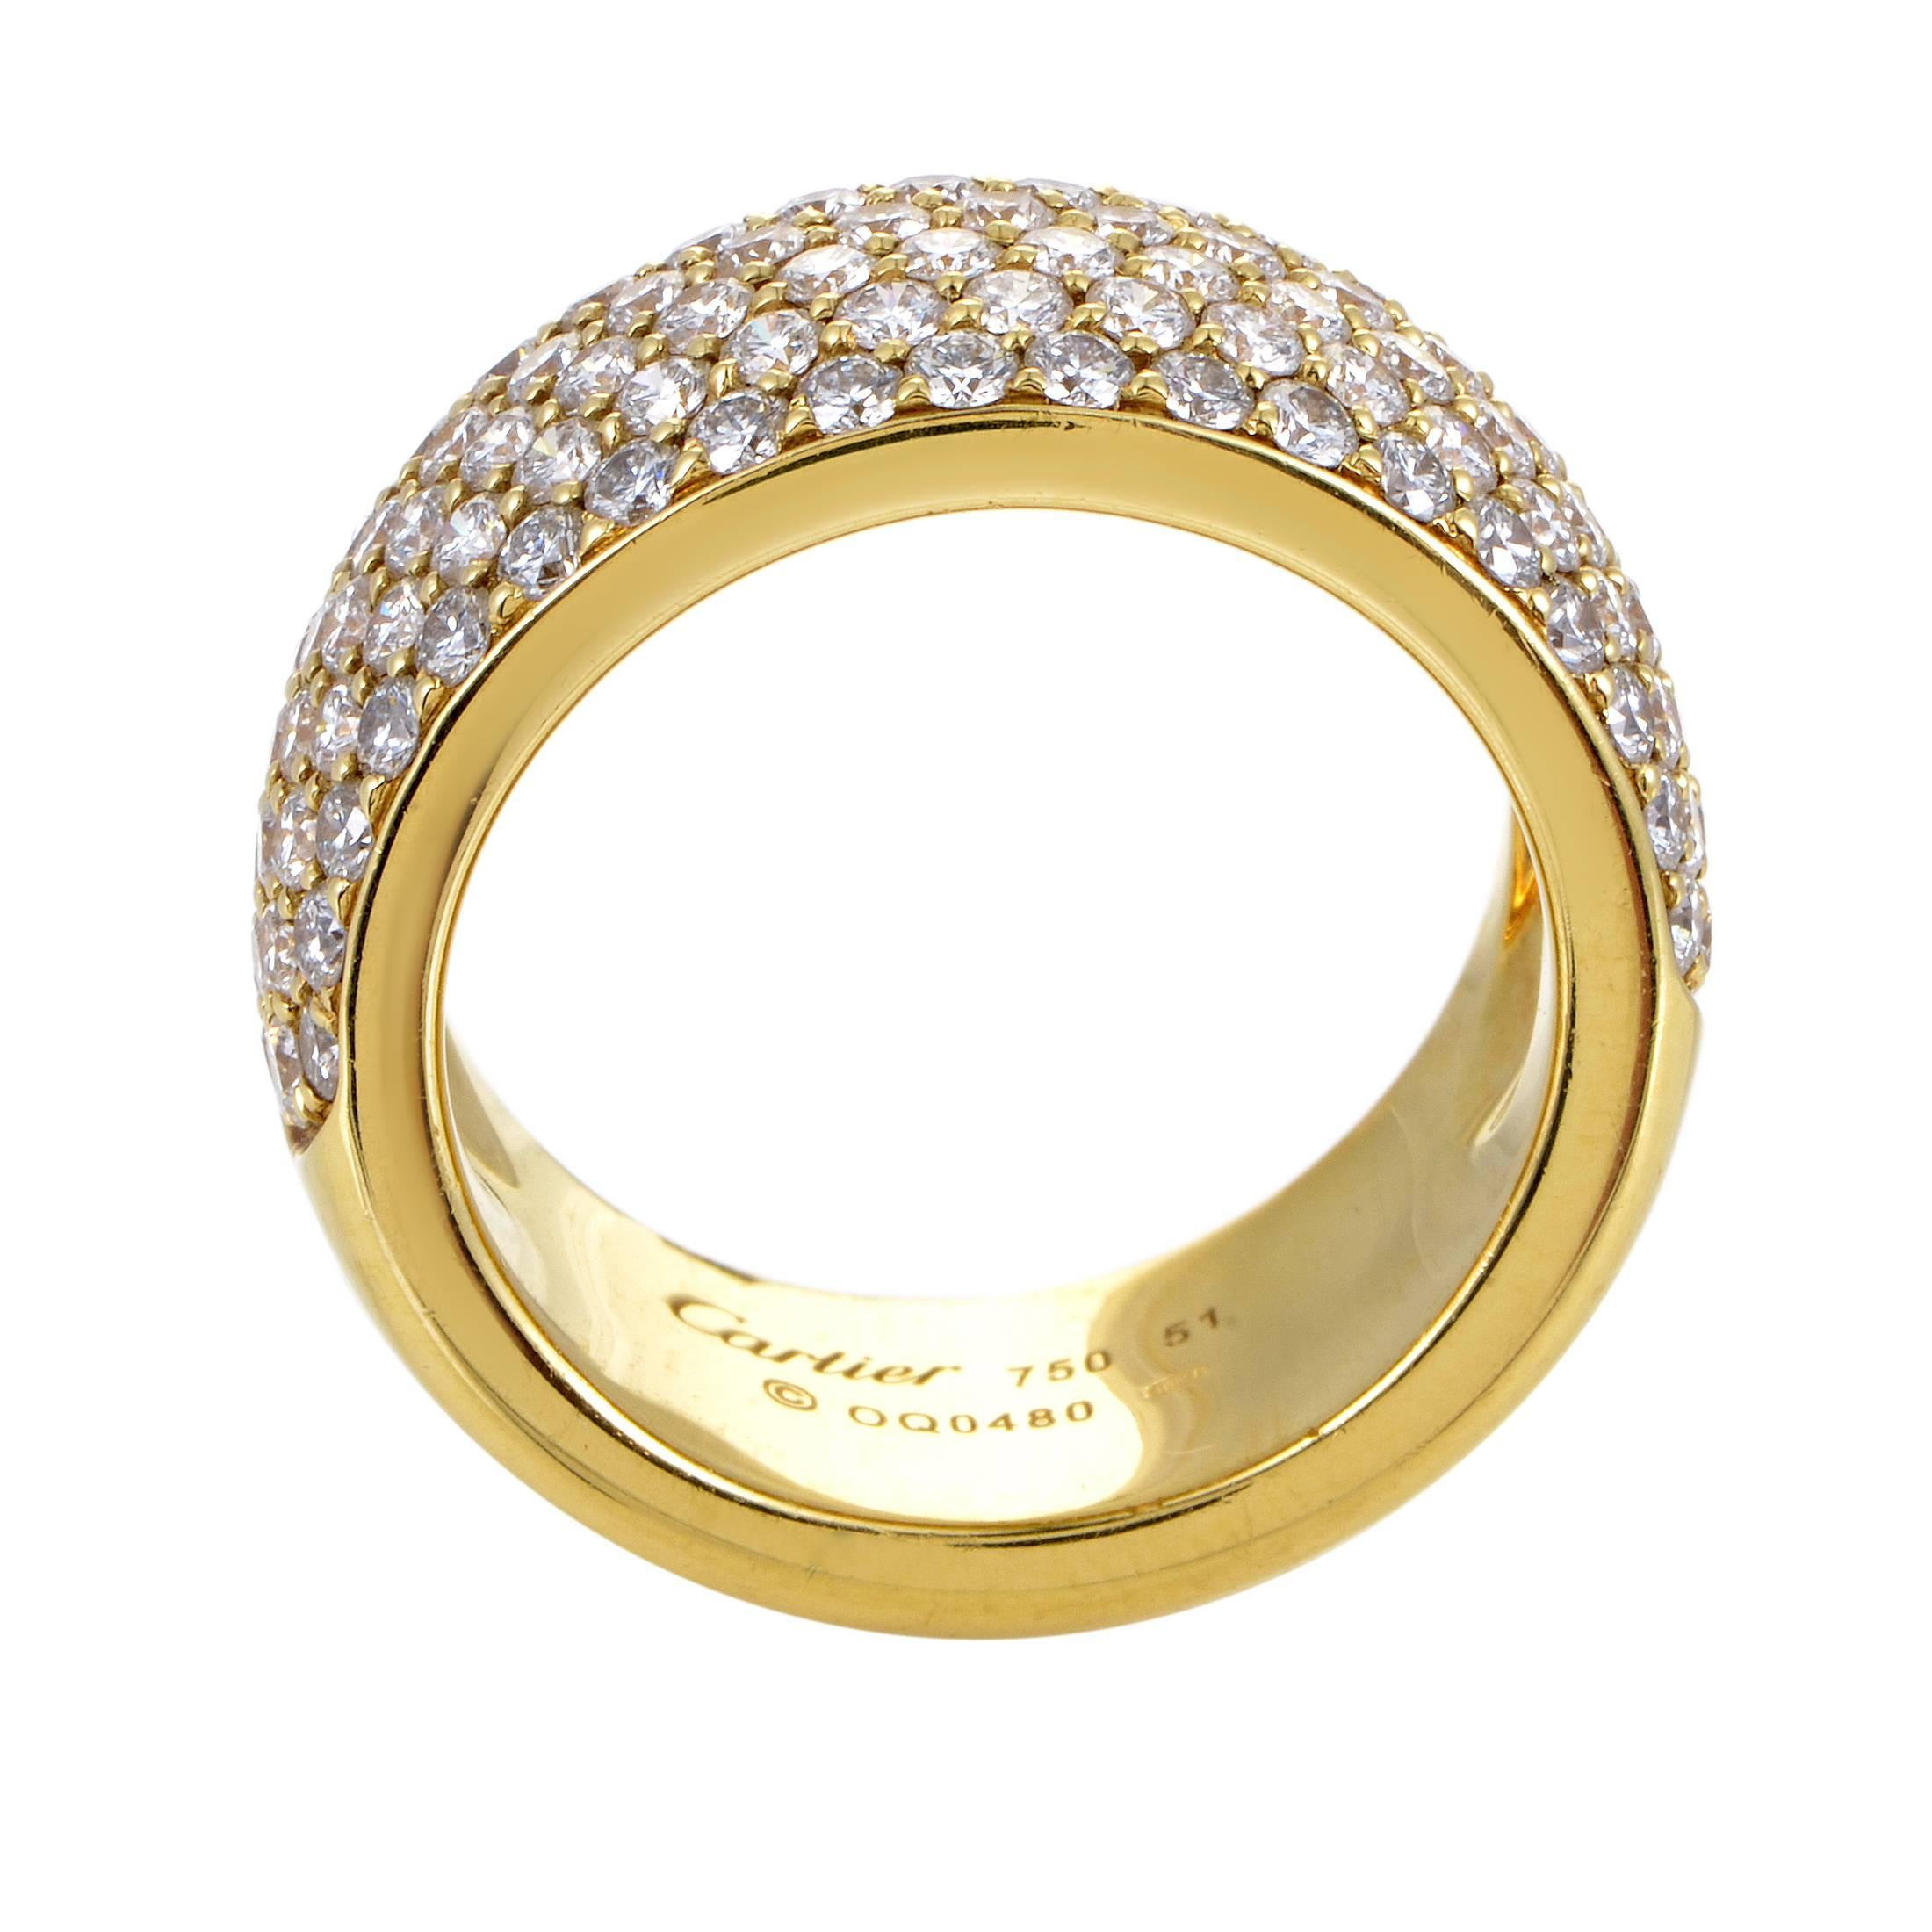 Luscious, lavish, luxurious- this diamond paved ring from Cartier is the epitome of elegance. The ring is made of 18K yellow gold and is set with a pave of 1.50ct of white diamonds.
Band Thickness: 8 mm
Retail Price: $14,300.00 (Plus